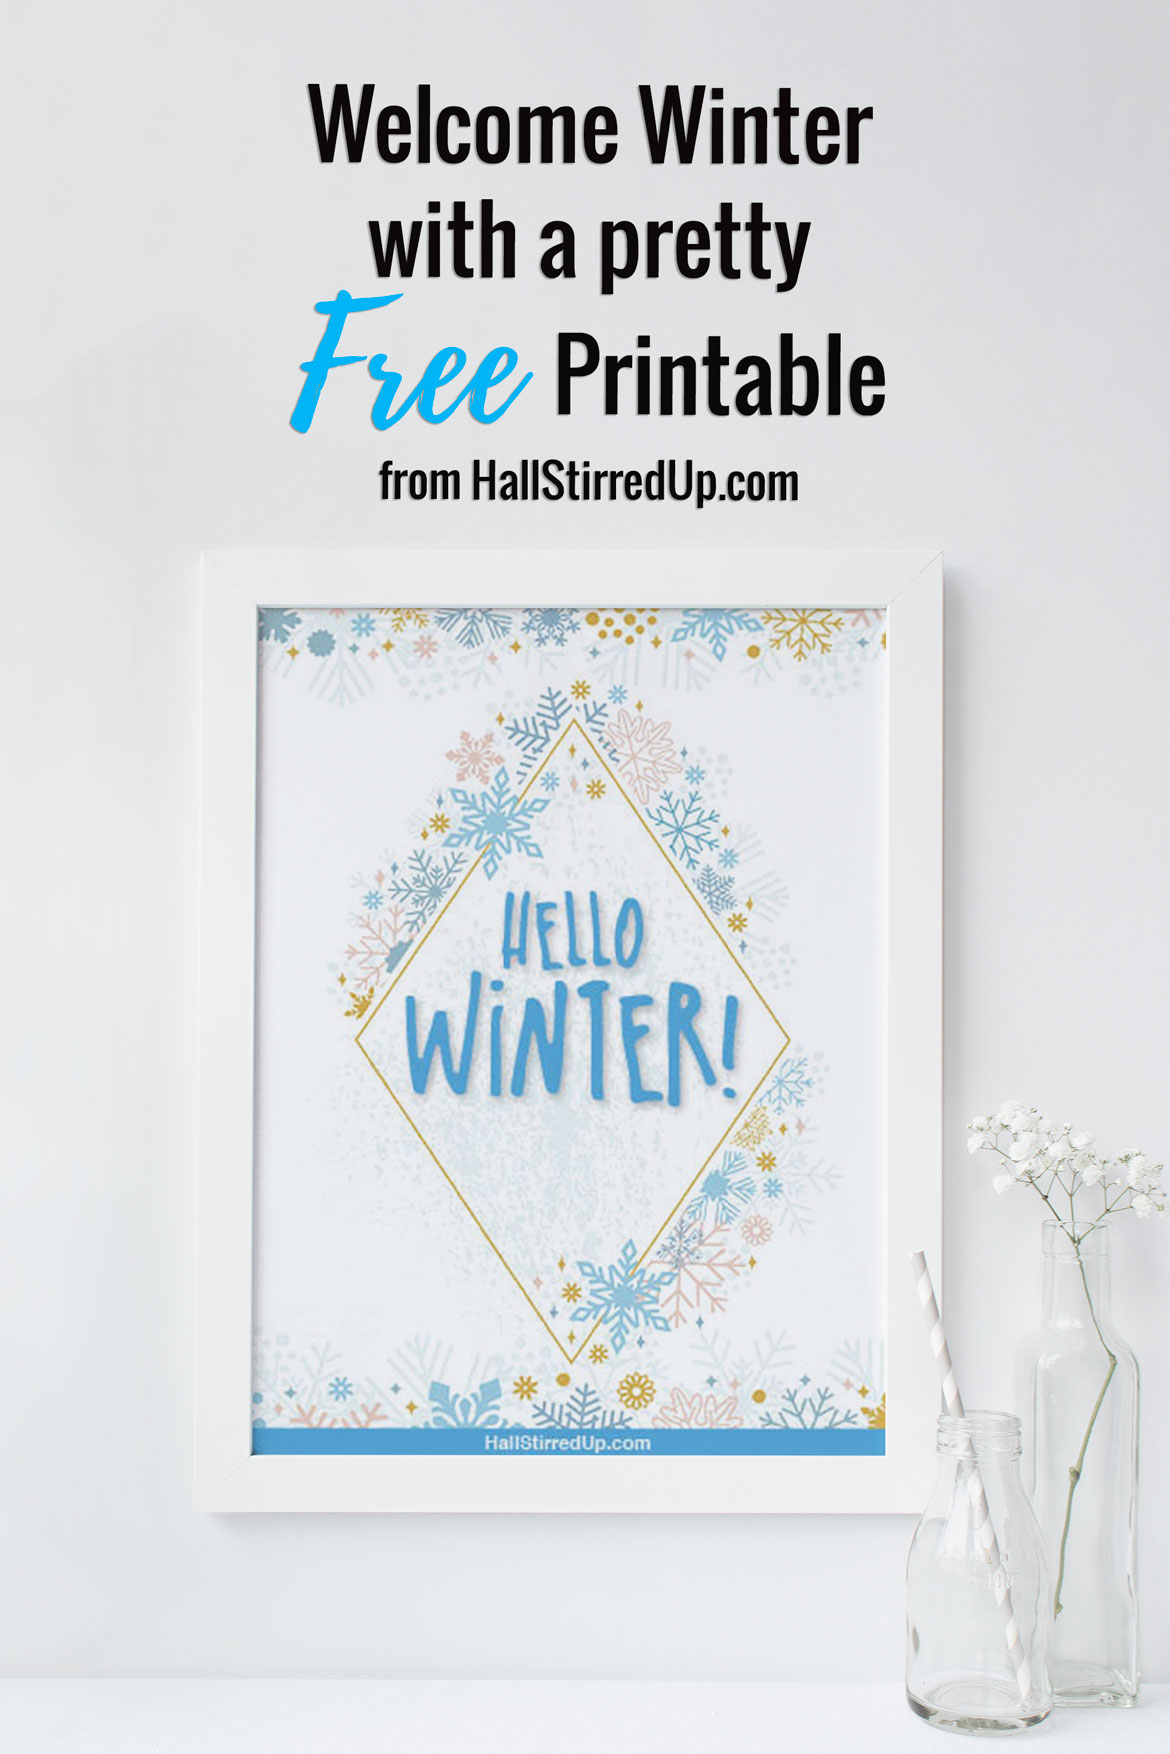 Say Hello to Winter with a free printable from HallStirredUpcom